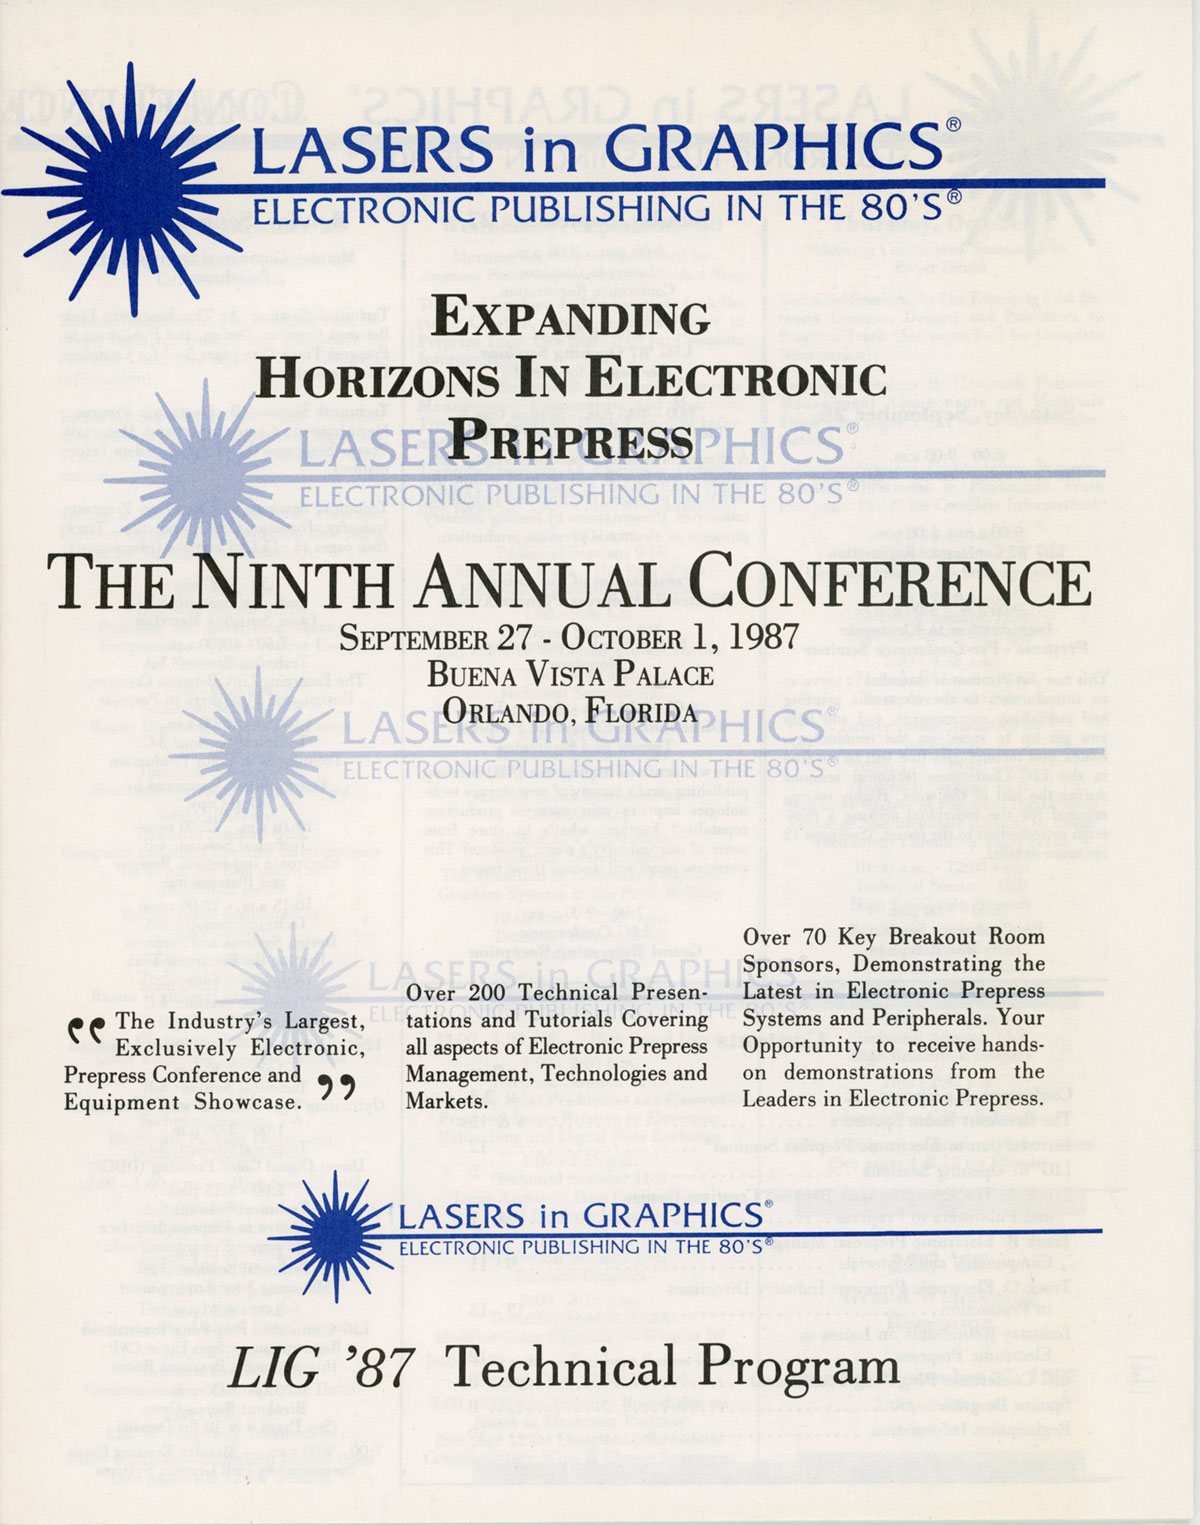 Lasers in Graphics Electronic Publishing in the 80's Expanding Horizons In Electronic Prepress The Ninth Annual Conference